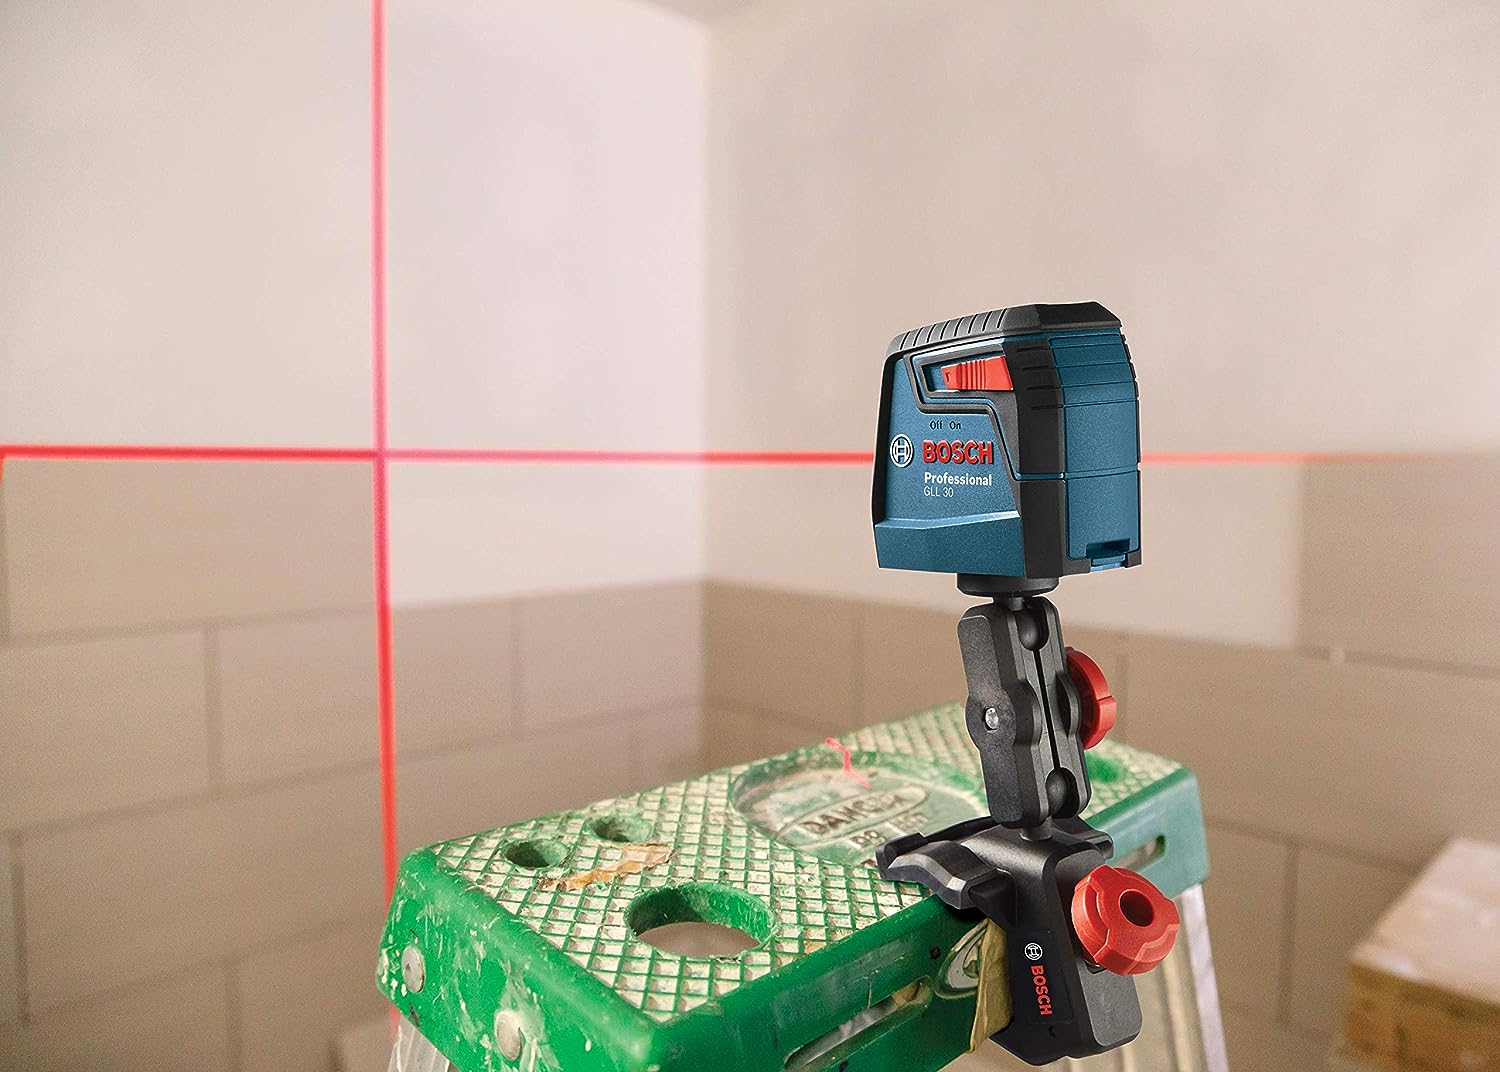 How To Put Bosch Laser Level GLL 30 In Manual Mode